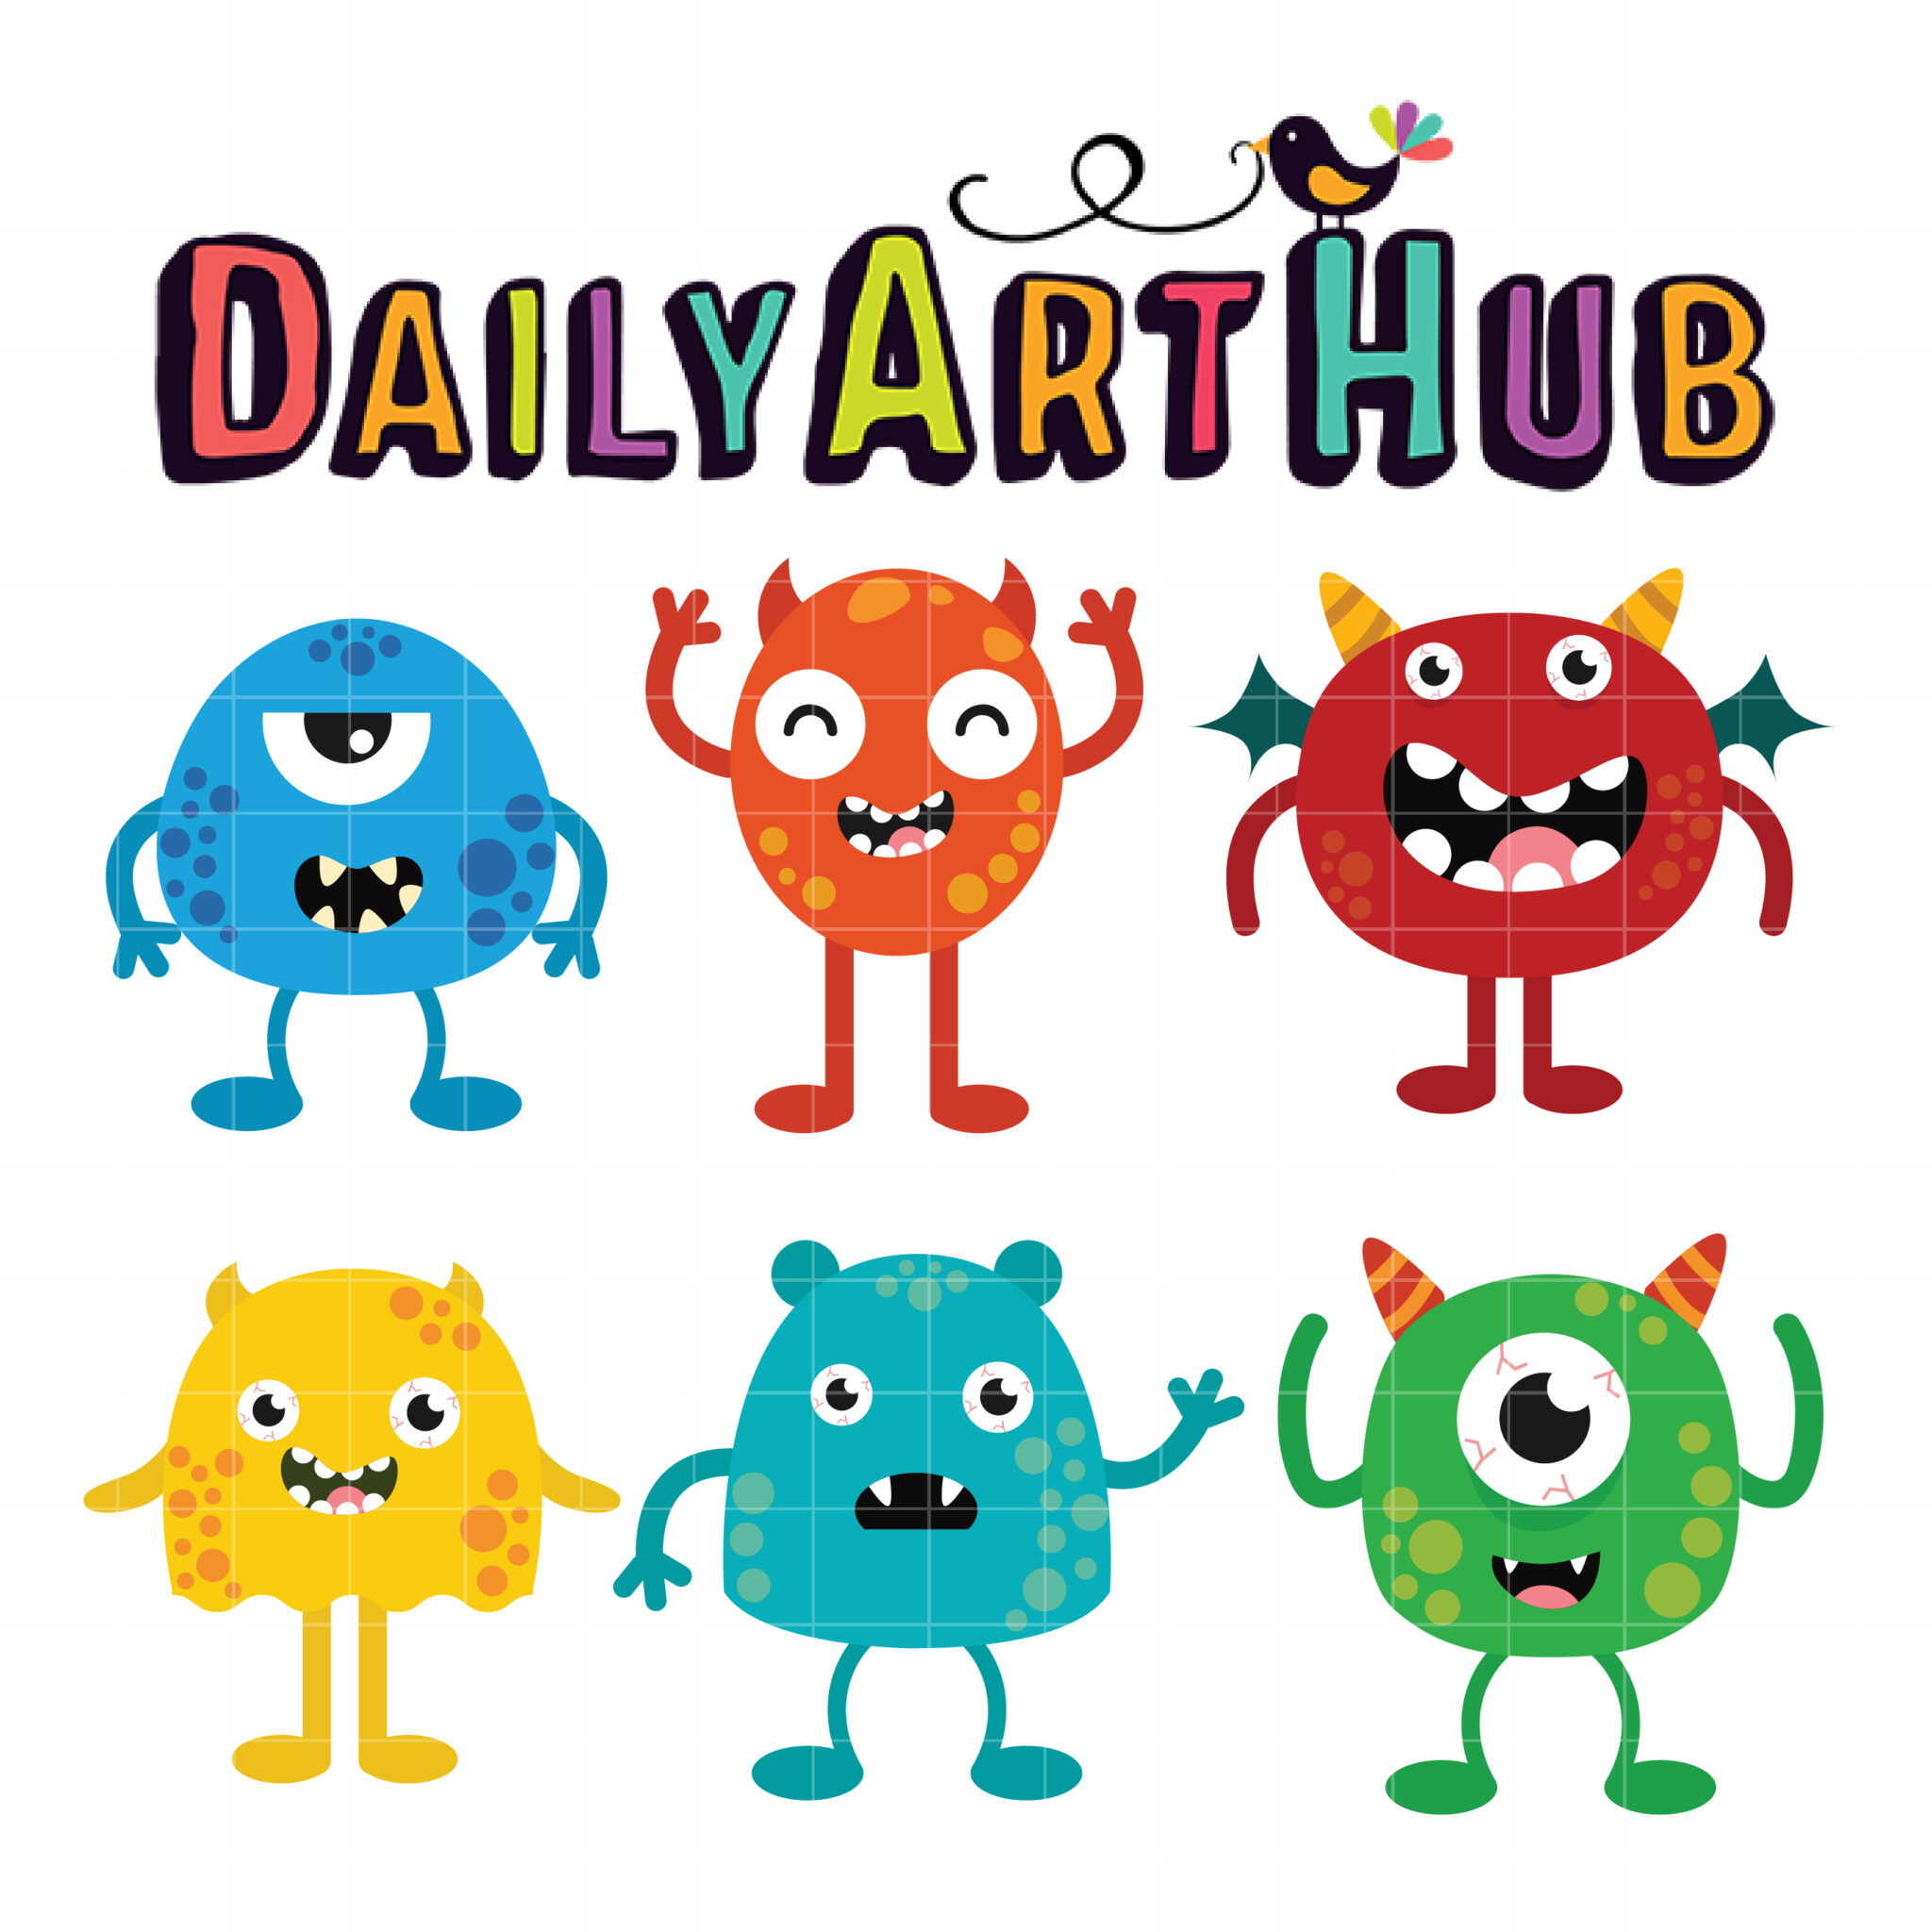 https://www.dailyarthub.com/wp-content/uploads/2019/08/Silly-Monsters-scaled.jpg